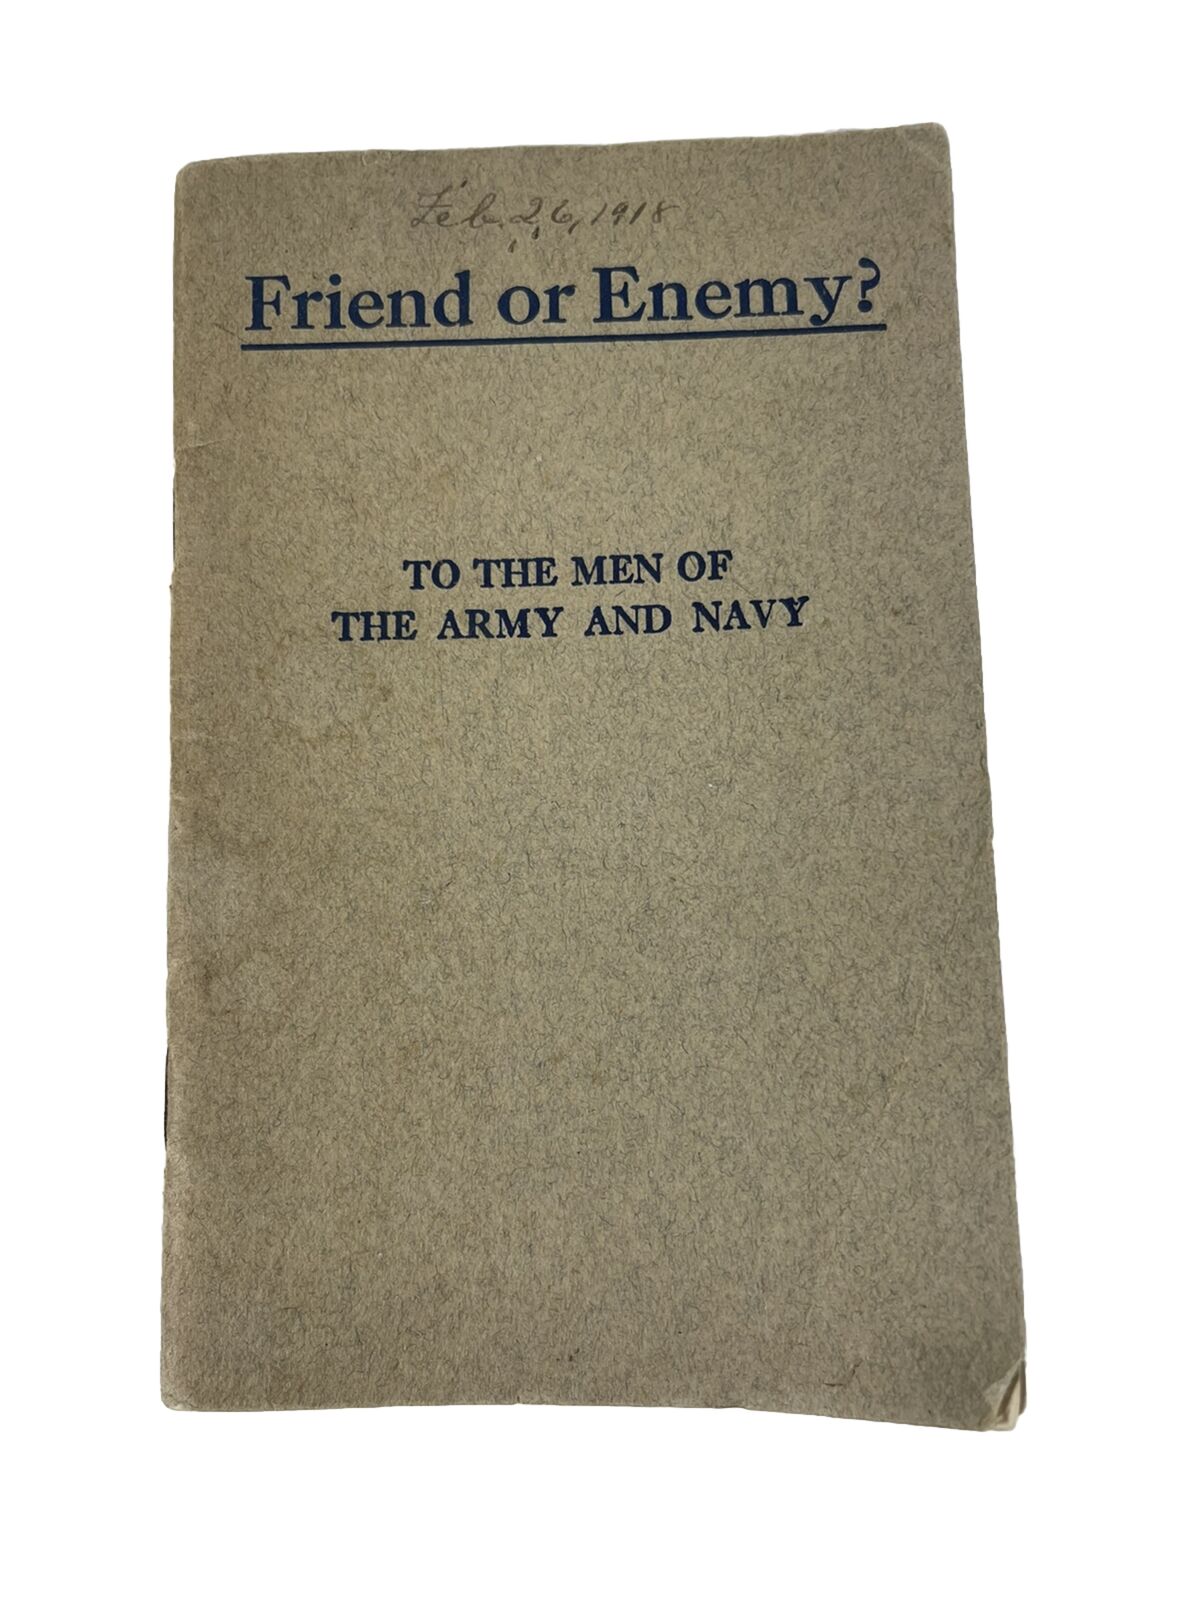 WW1 Era Friend Or Enemy? To The Men Of The Army & Navy Booklet 